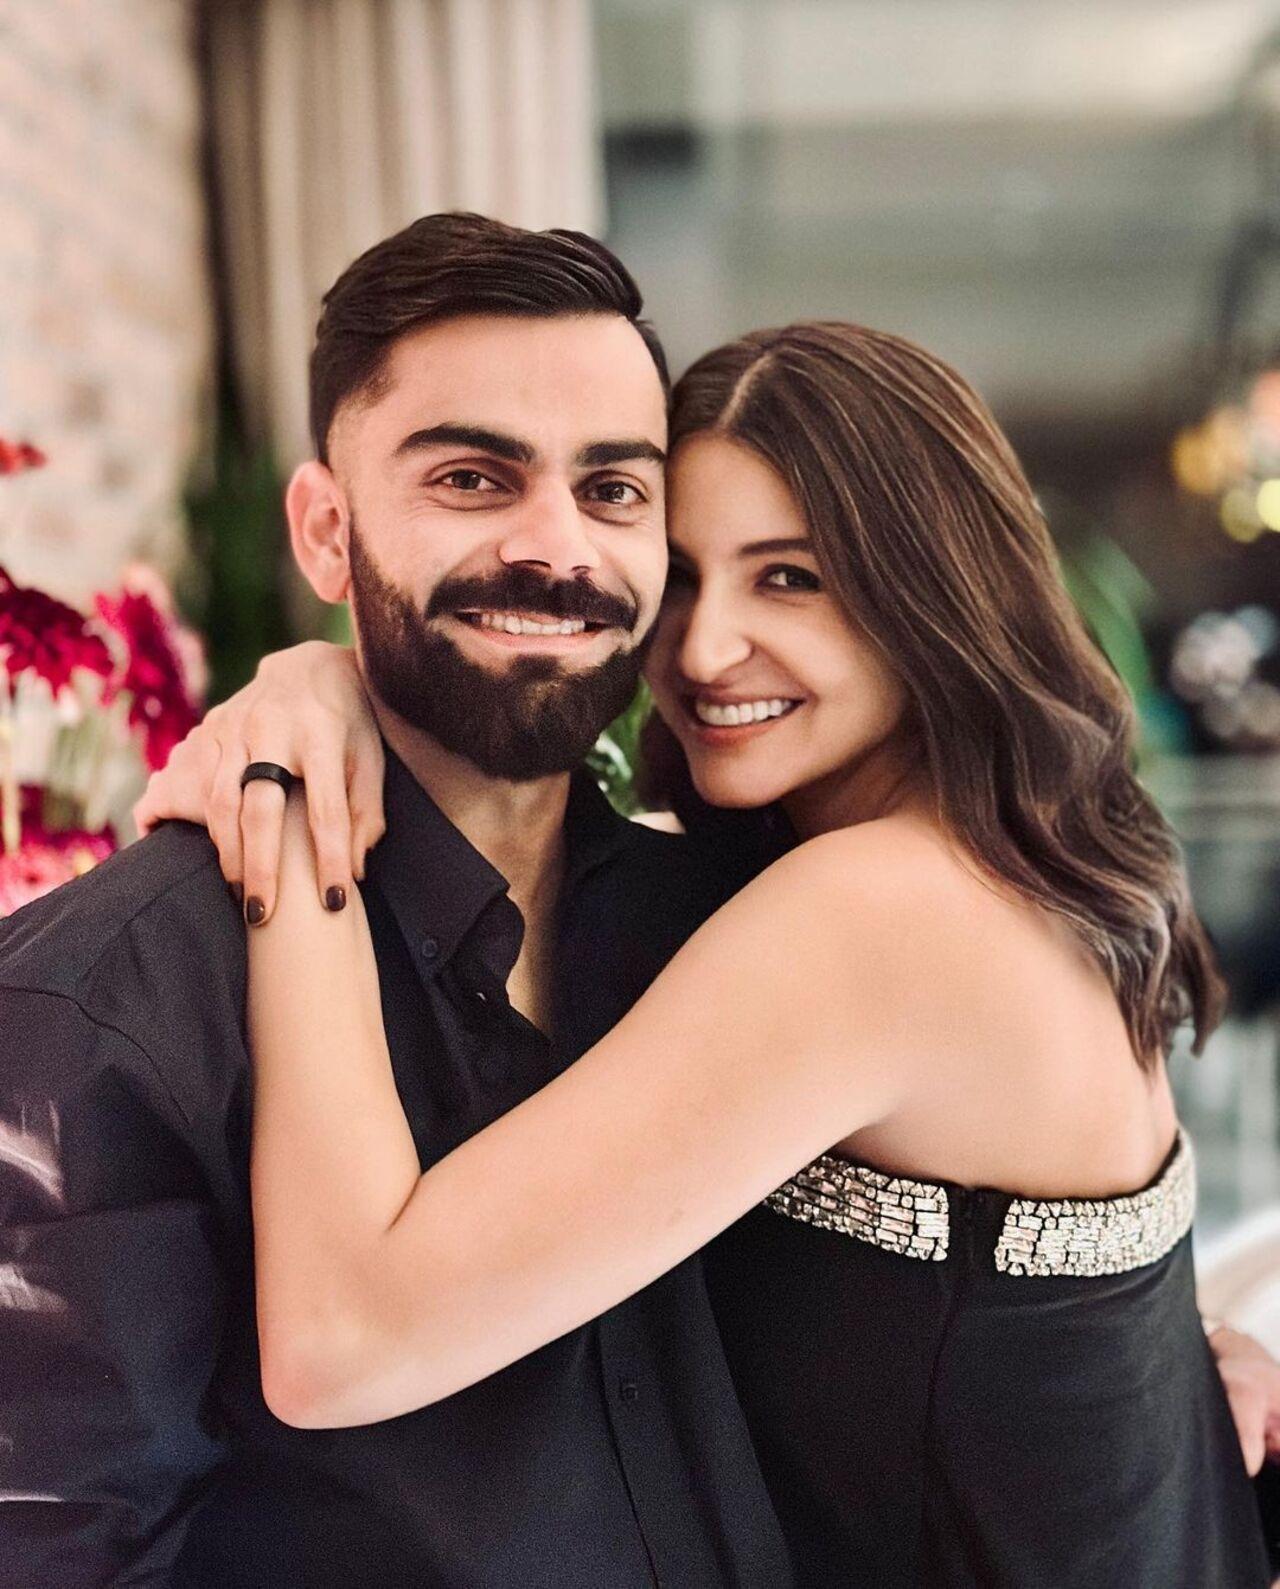 Anushka Sharma and Virat Kohli quietly welcomed their second child in February this year in London. They named their son Akaay Kohli